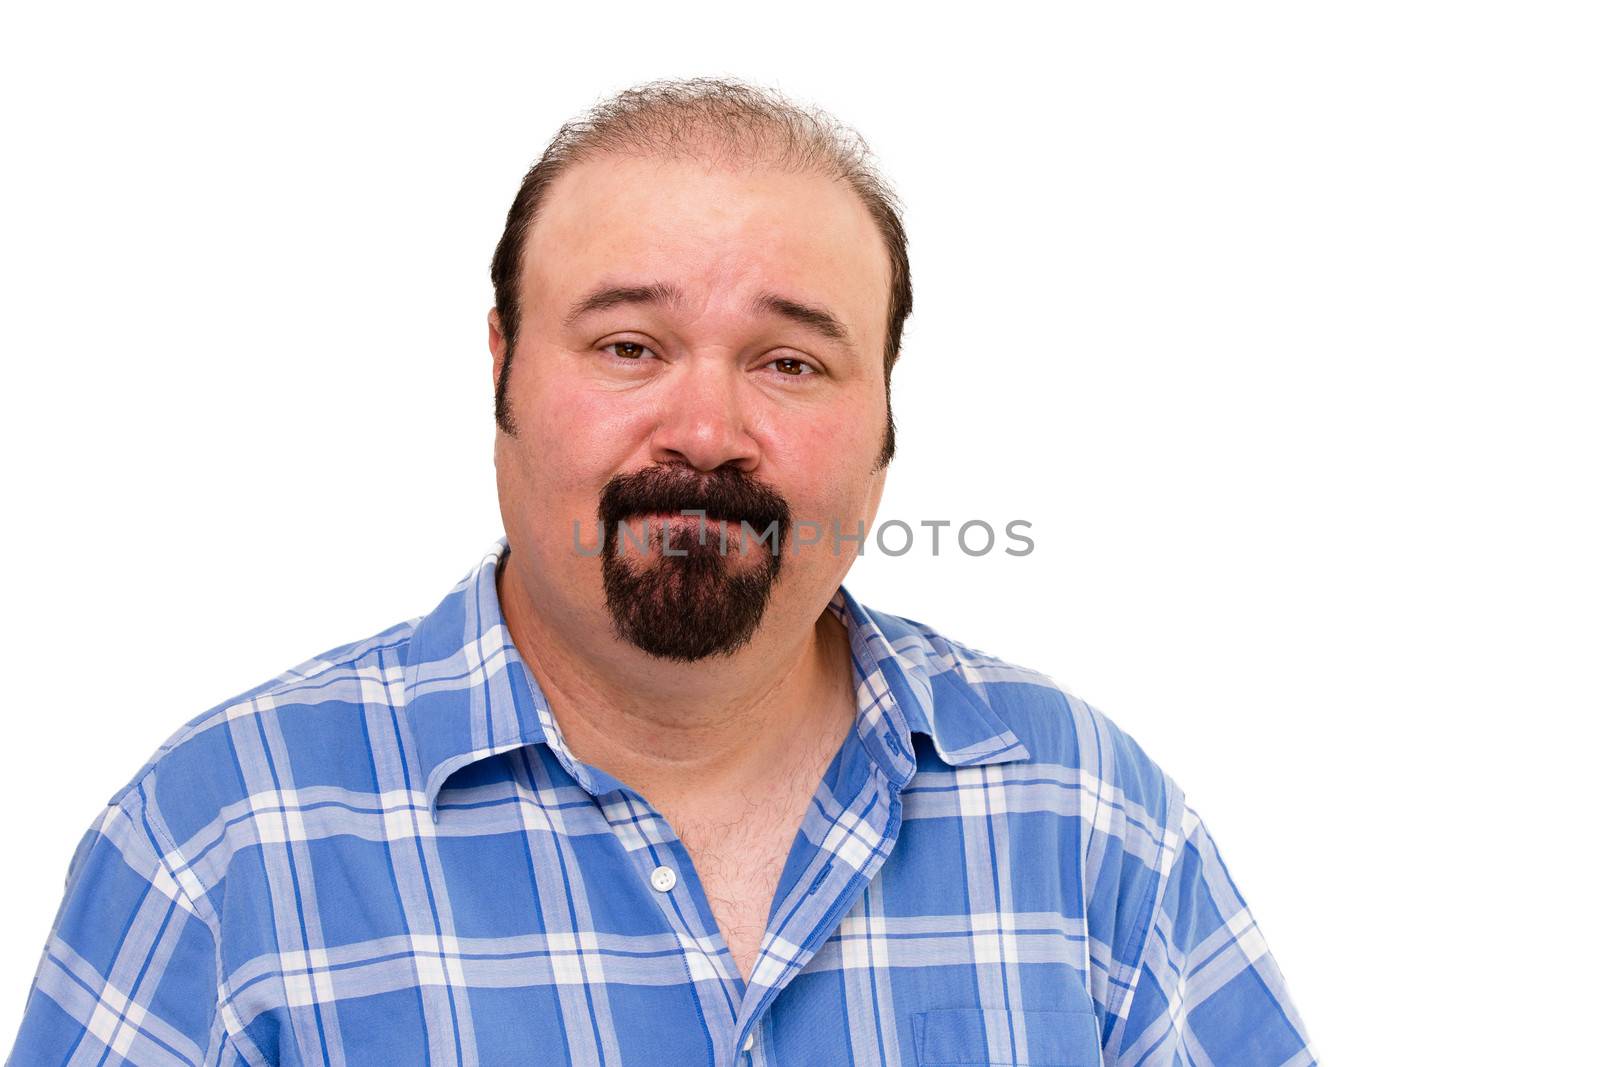 Speechless Caucasian middle-aged man wearing a casual checkered shirt, portrait on white background